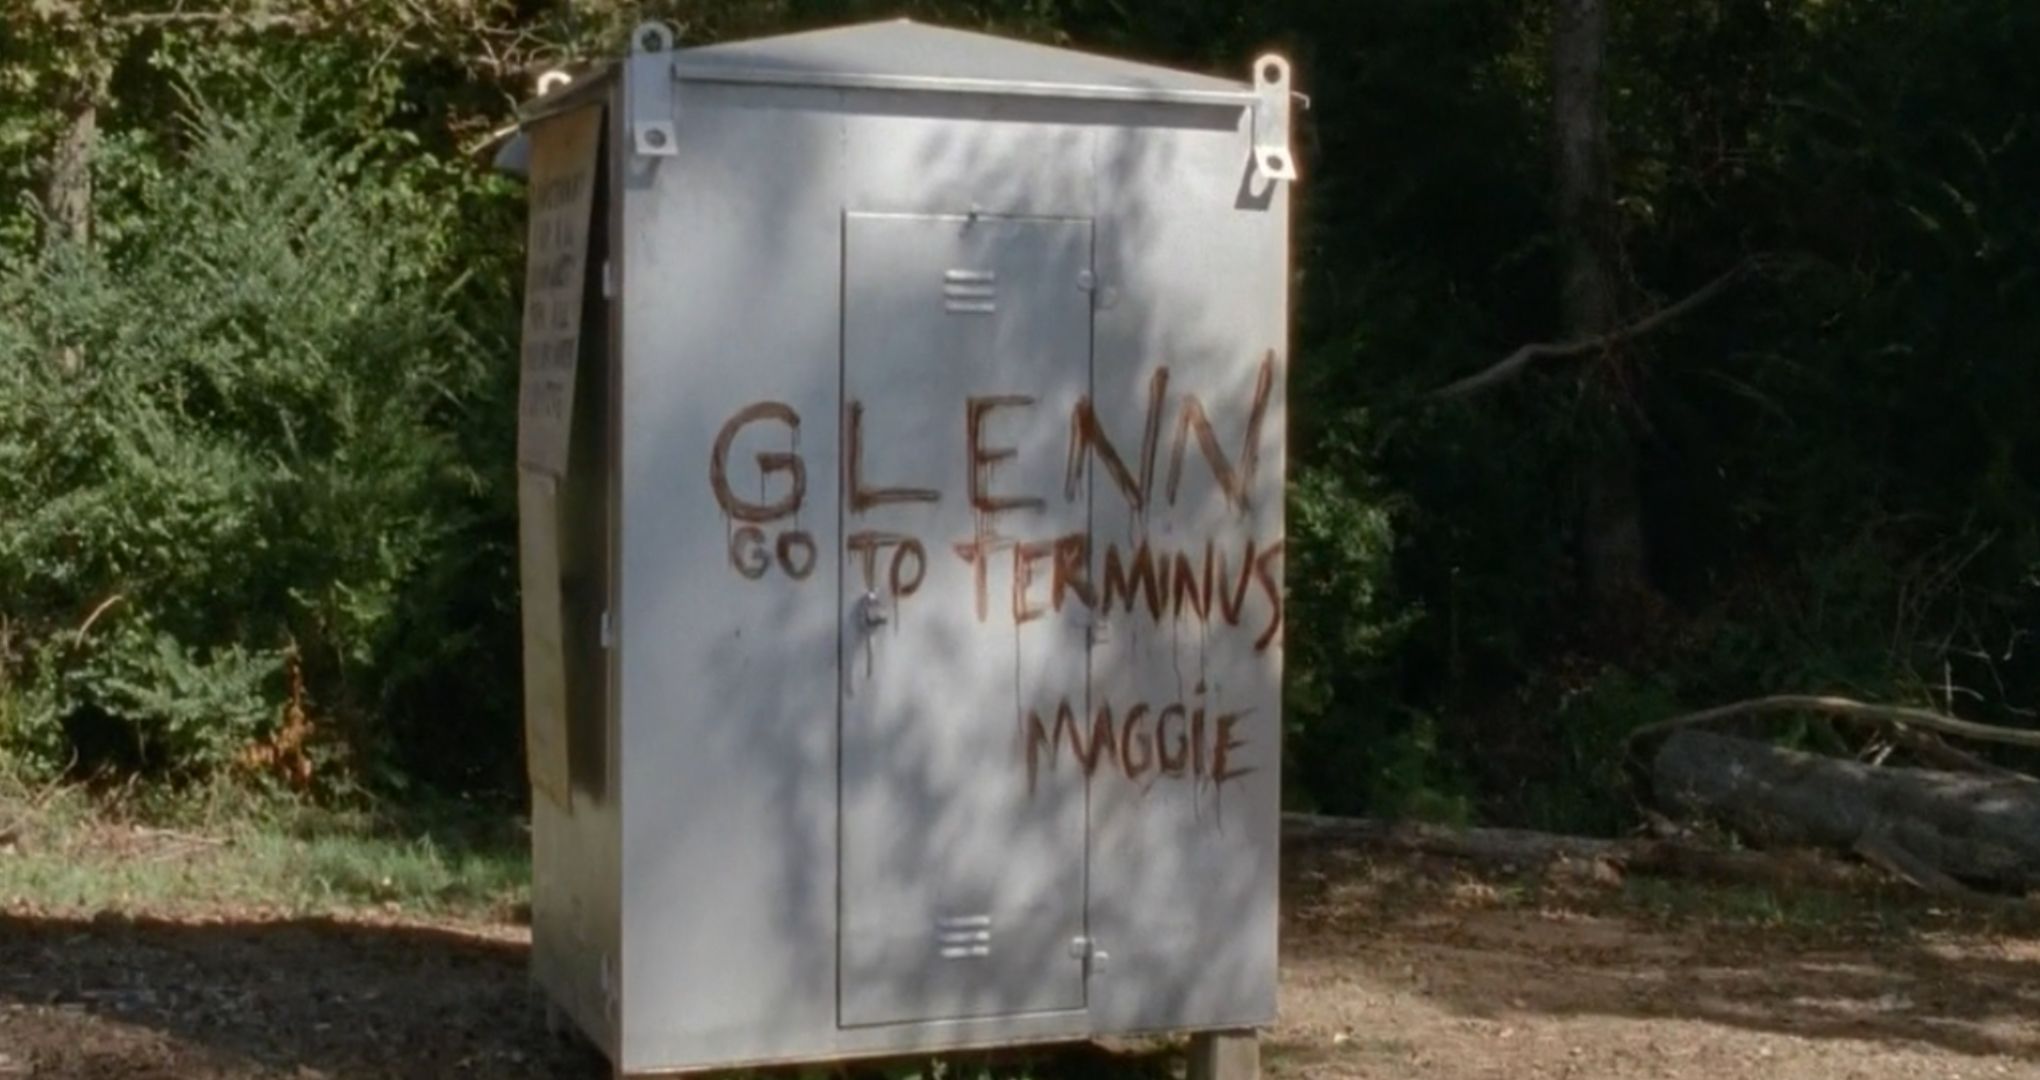 Maggie Tells Glenn to Go to Terminus in The Walking Dead